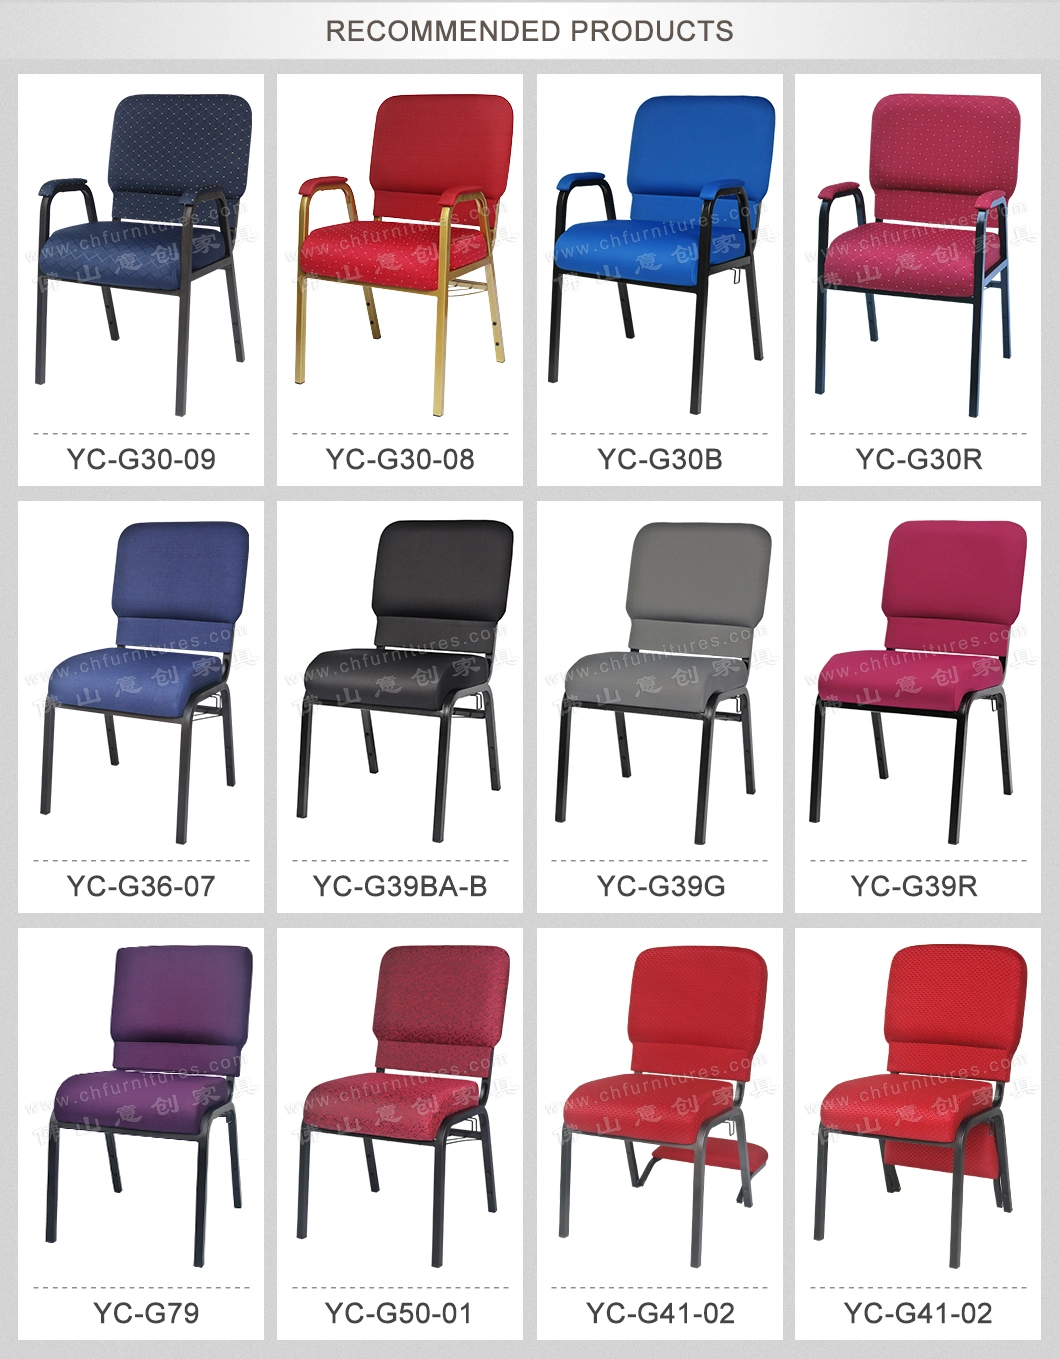 Yc-G79 Wholesale Purple Interlocking and Back Pocket Church Chairs for Sale